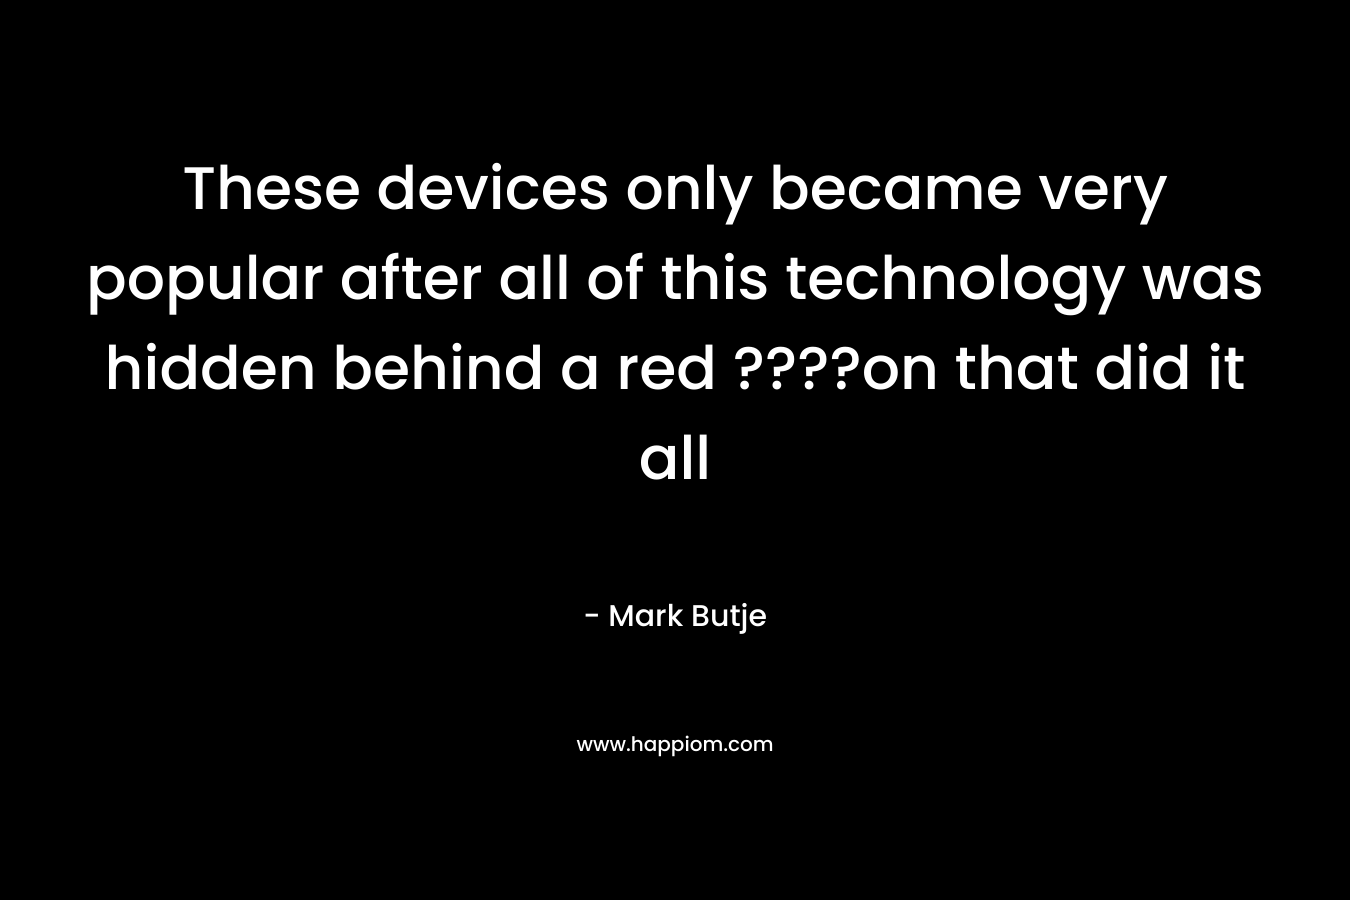 These devices only became very popular after all of this technology was hidden behind a red ????on that did it all